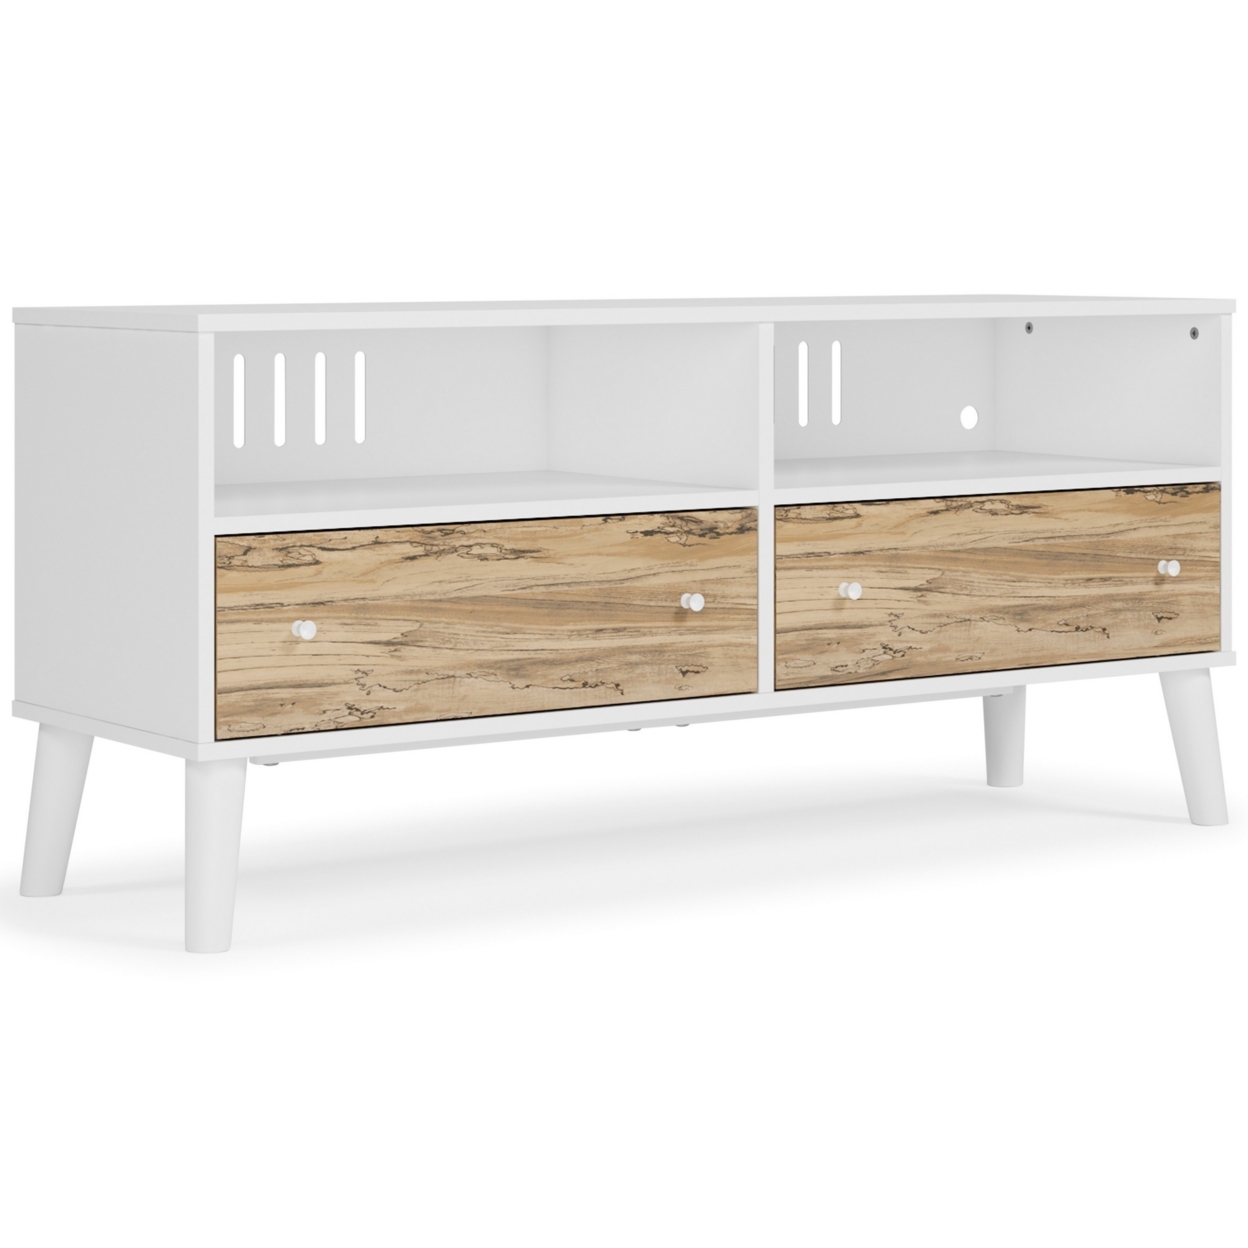 TV Stand With 2 Drawers And 2 Open Compartments, Brown And White- Saltoro Sherpi